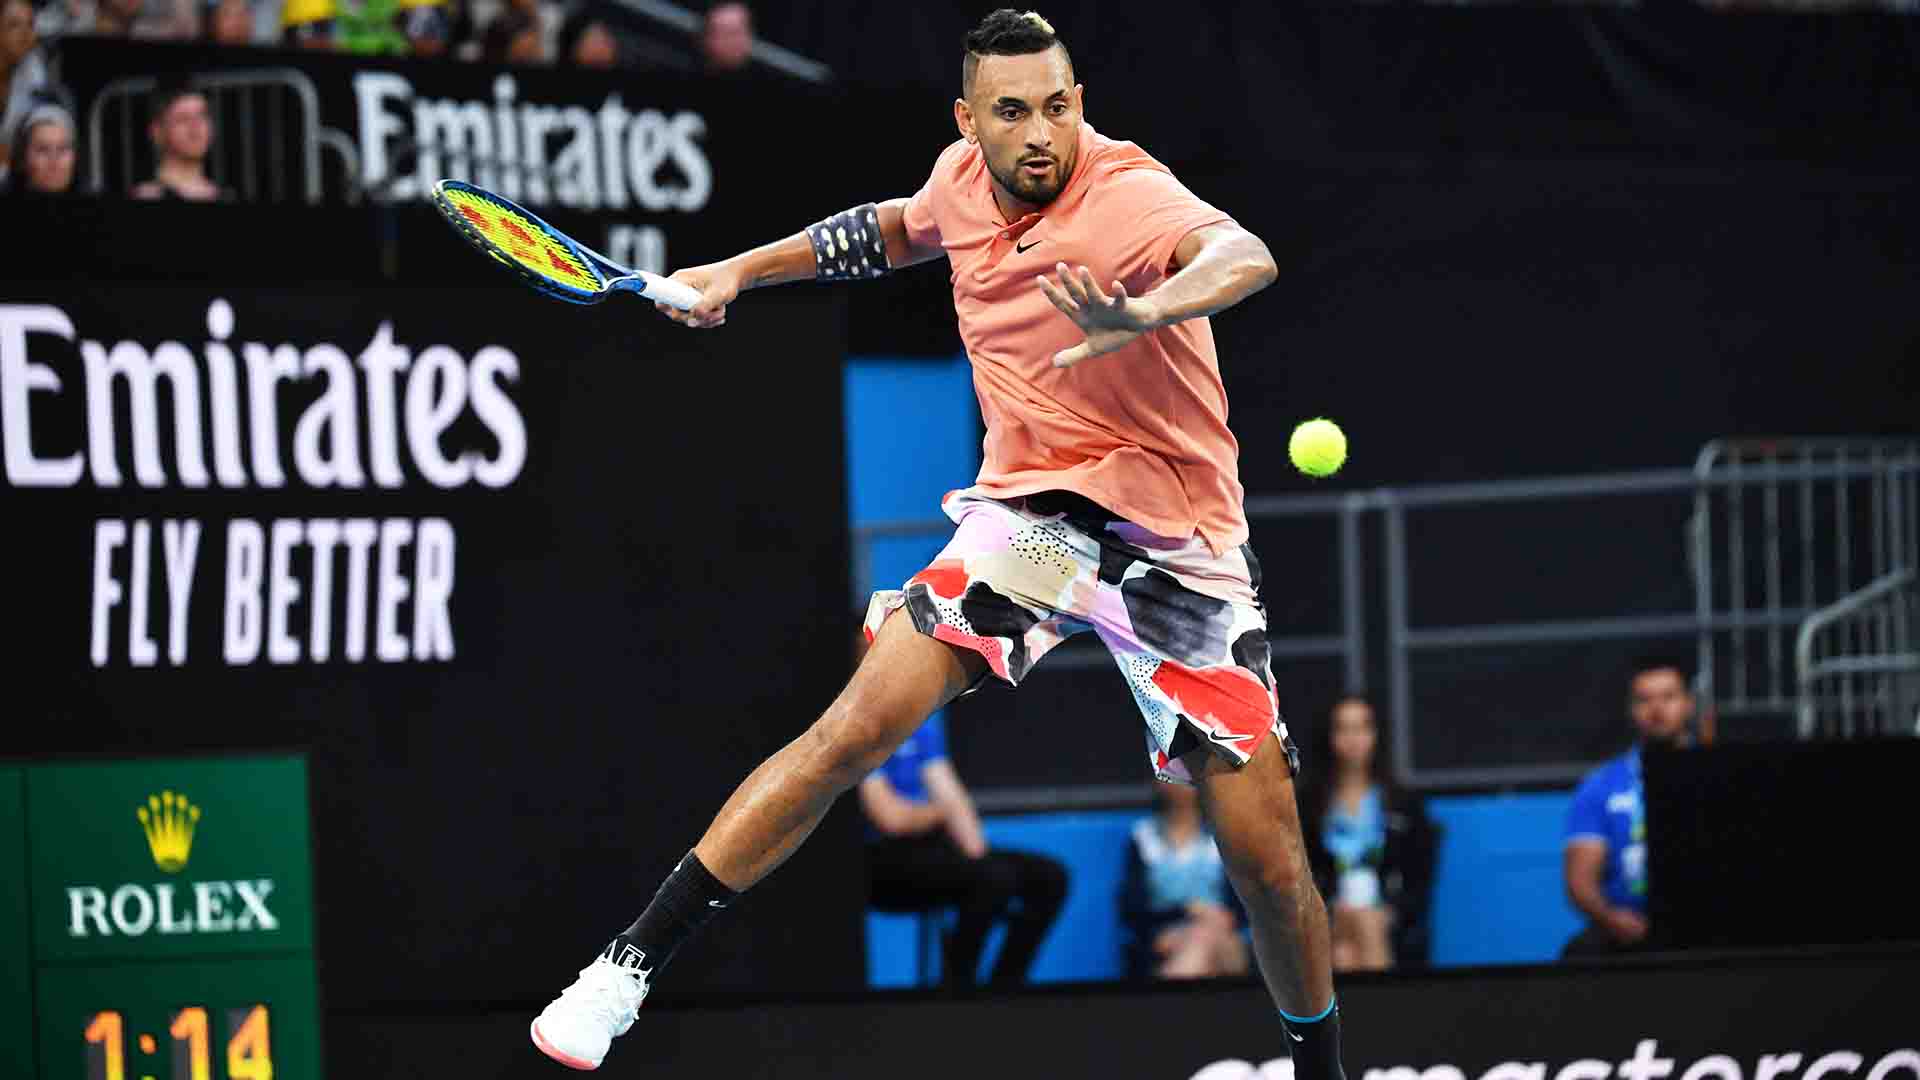 <a href='https://www.atptour.com/en/players/nick-kyrgios/ke17/overview'>Nick Kyrgios</a> owns a 3-0 tie-break record at this year's <a href='https://www.atptour.com/en/tournaments/australian-open/580/overview'>Australian Open</a>.